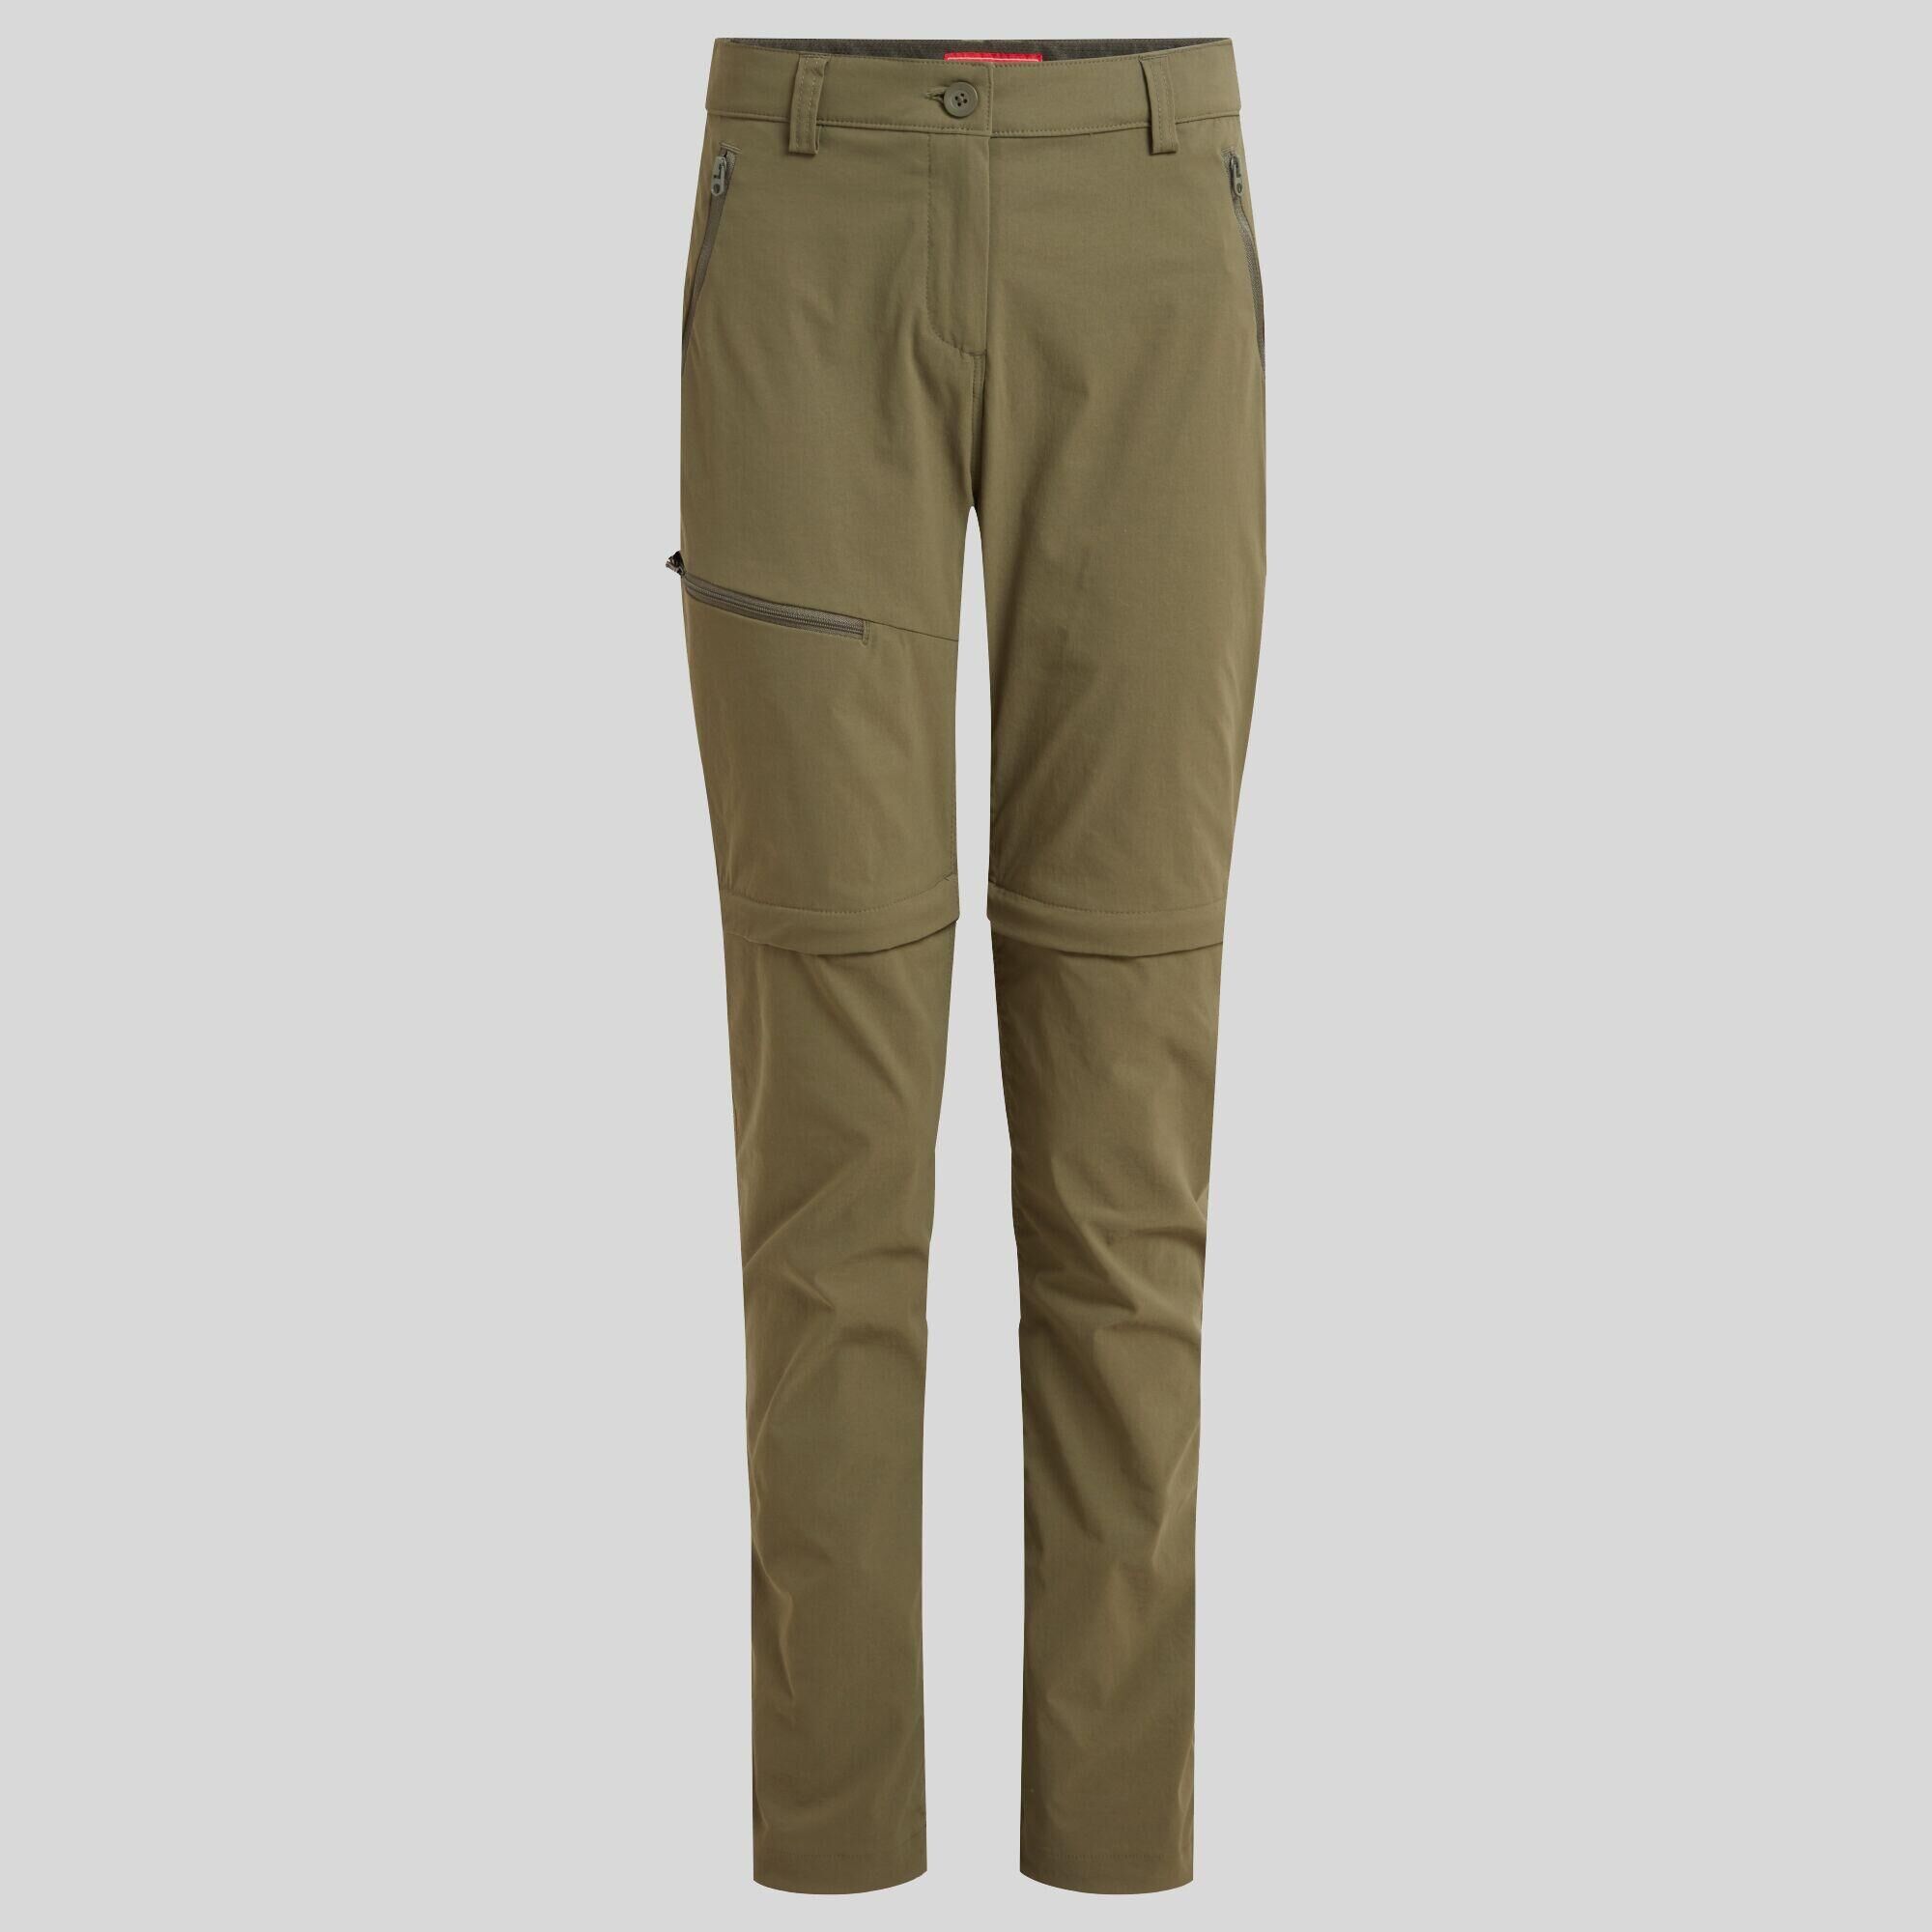 CRAGHOPPERS Womens Nosilife Pro Convertible Trouser